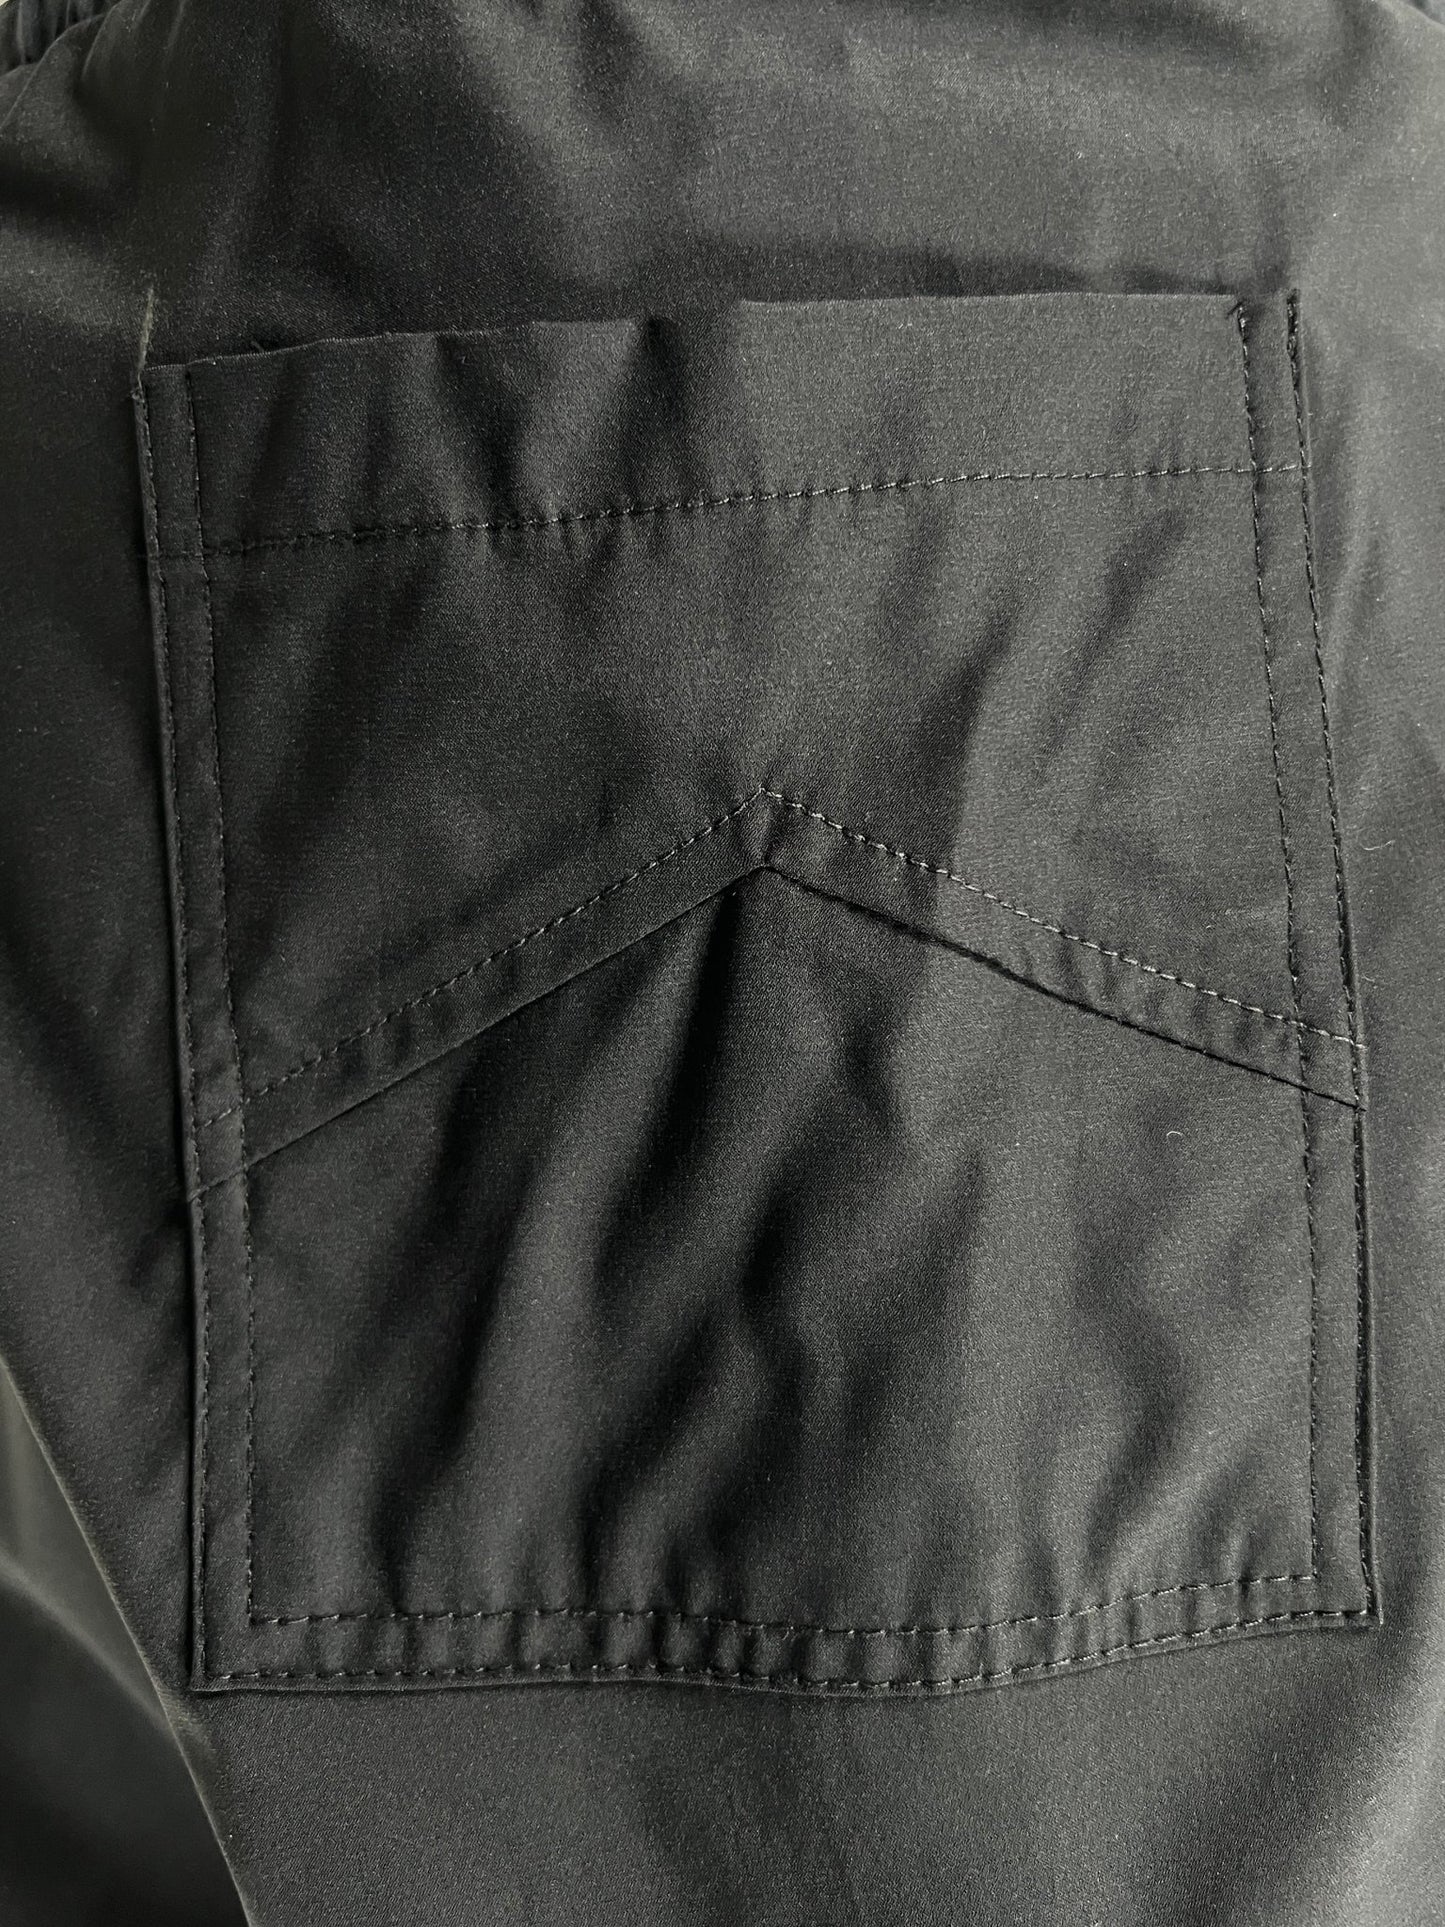 A black RHUDE Nylon Spandex swim trunks pocket with reinforced stitching on gray material.